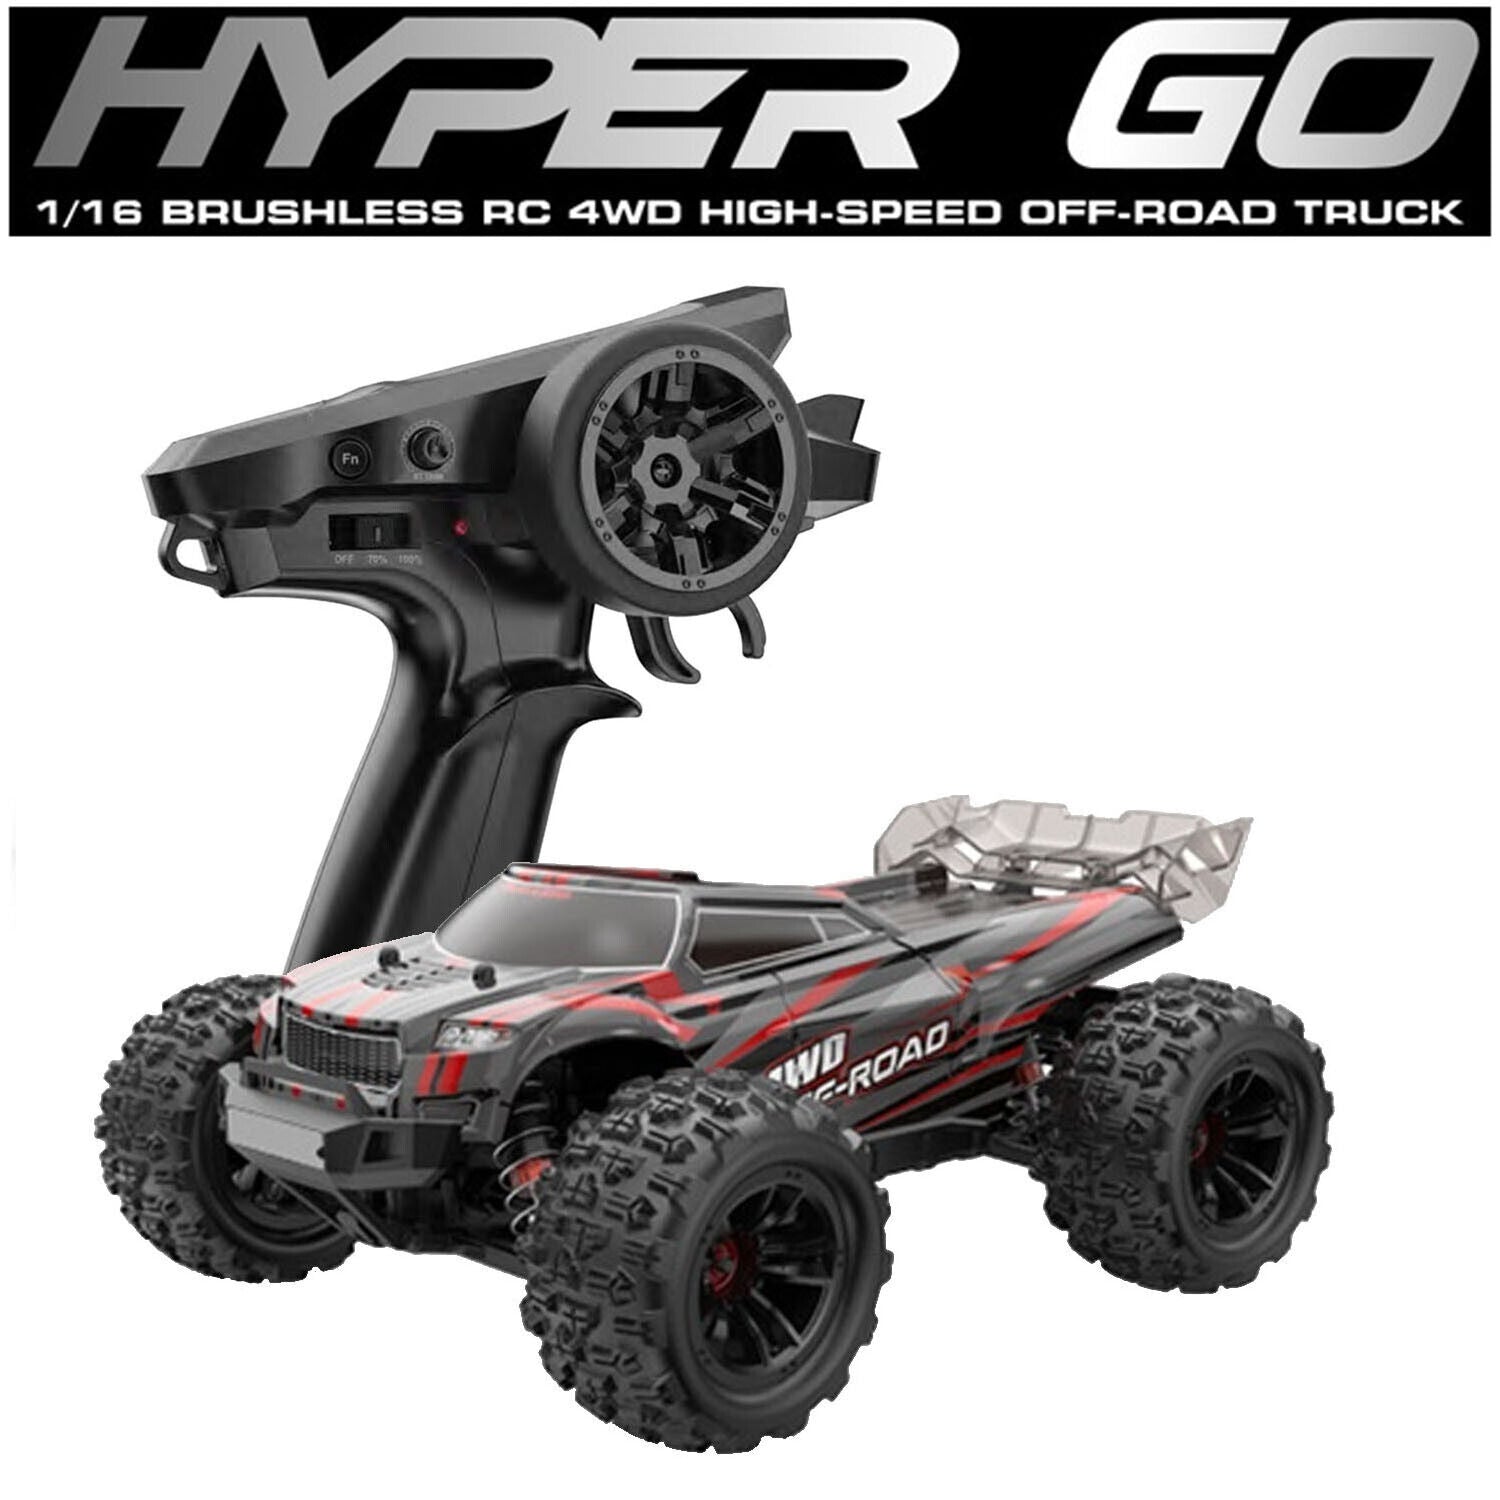 Hyper Go MJX 16210, 1/16 Brushless RC 4WD High Speed Off-Road Buggy Tr –  Havoc Hobby